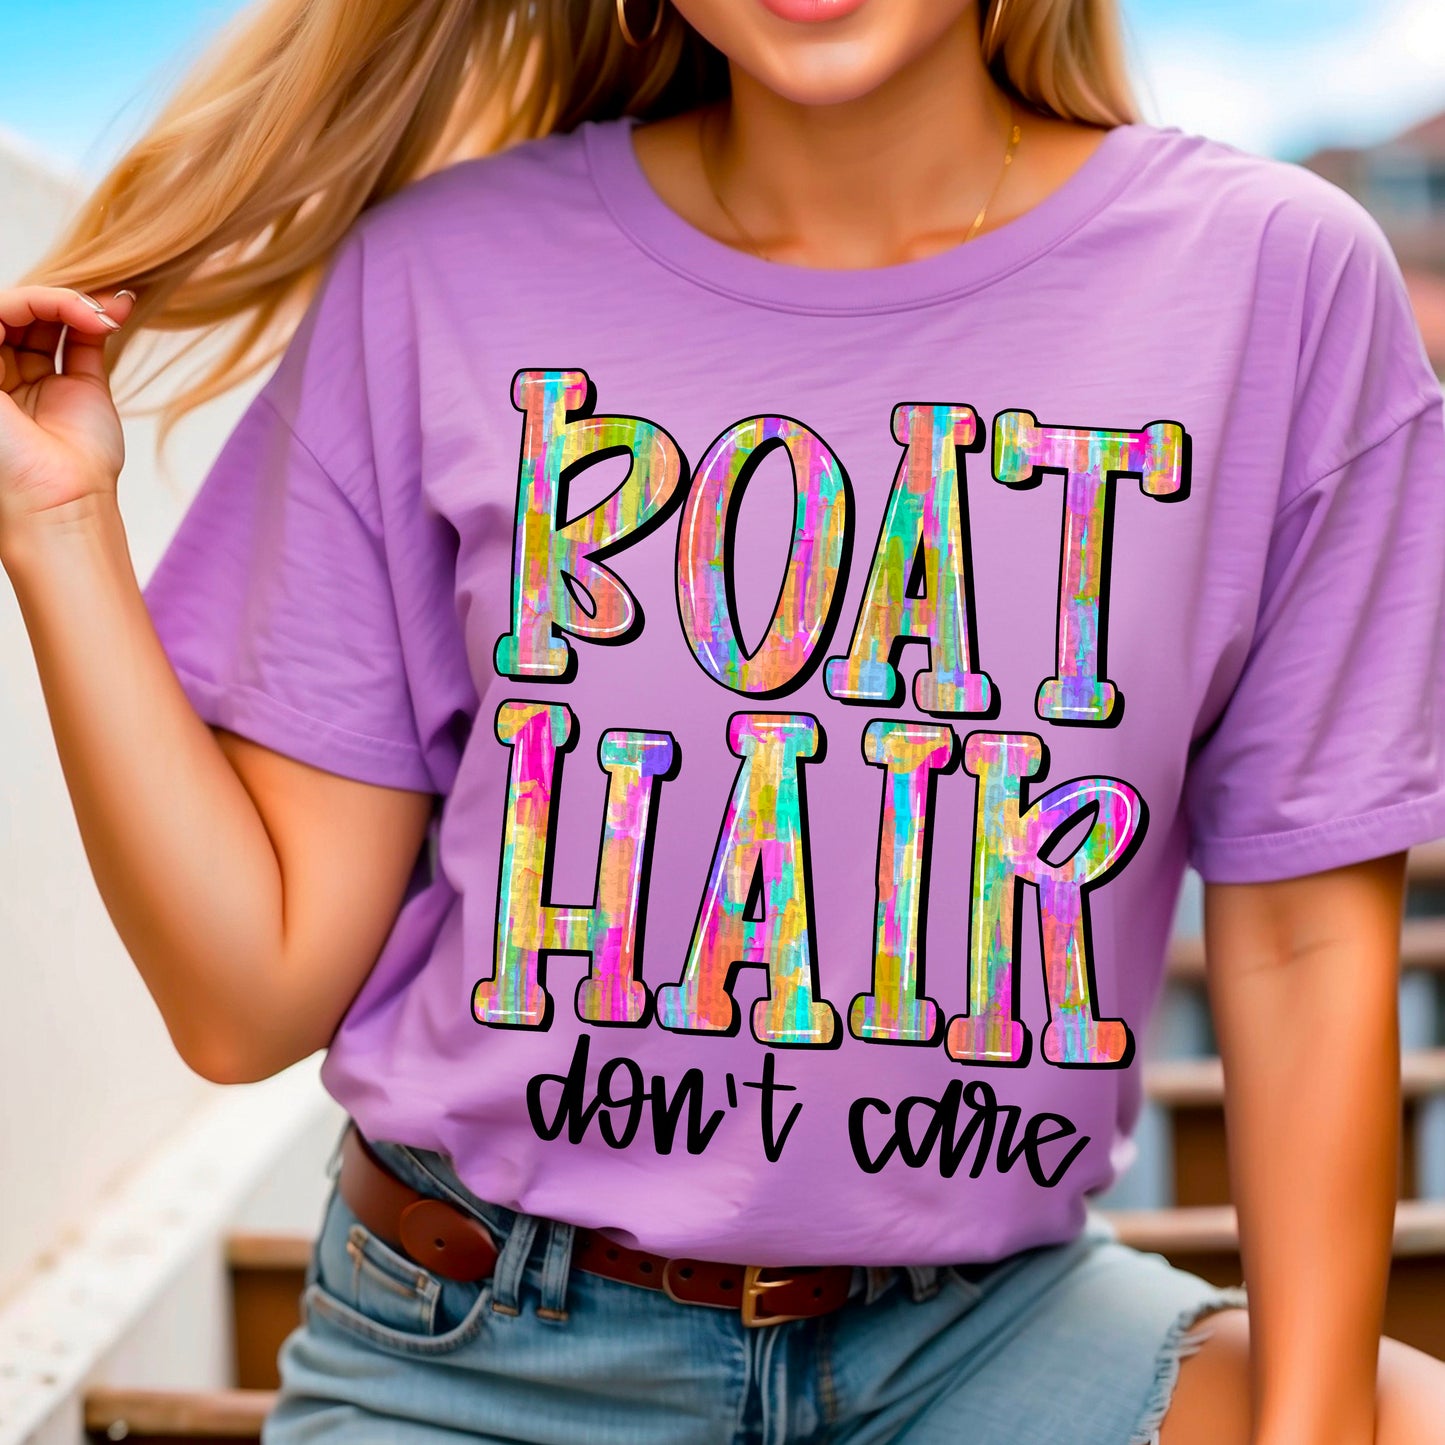 Boat Hair Don't Care DTF Transfer